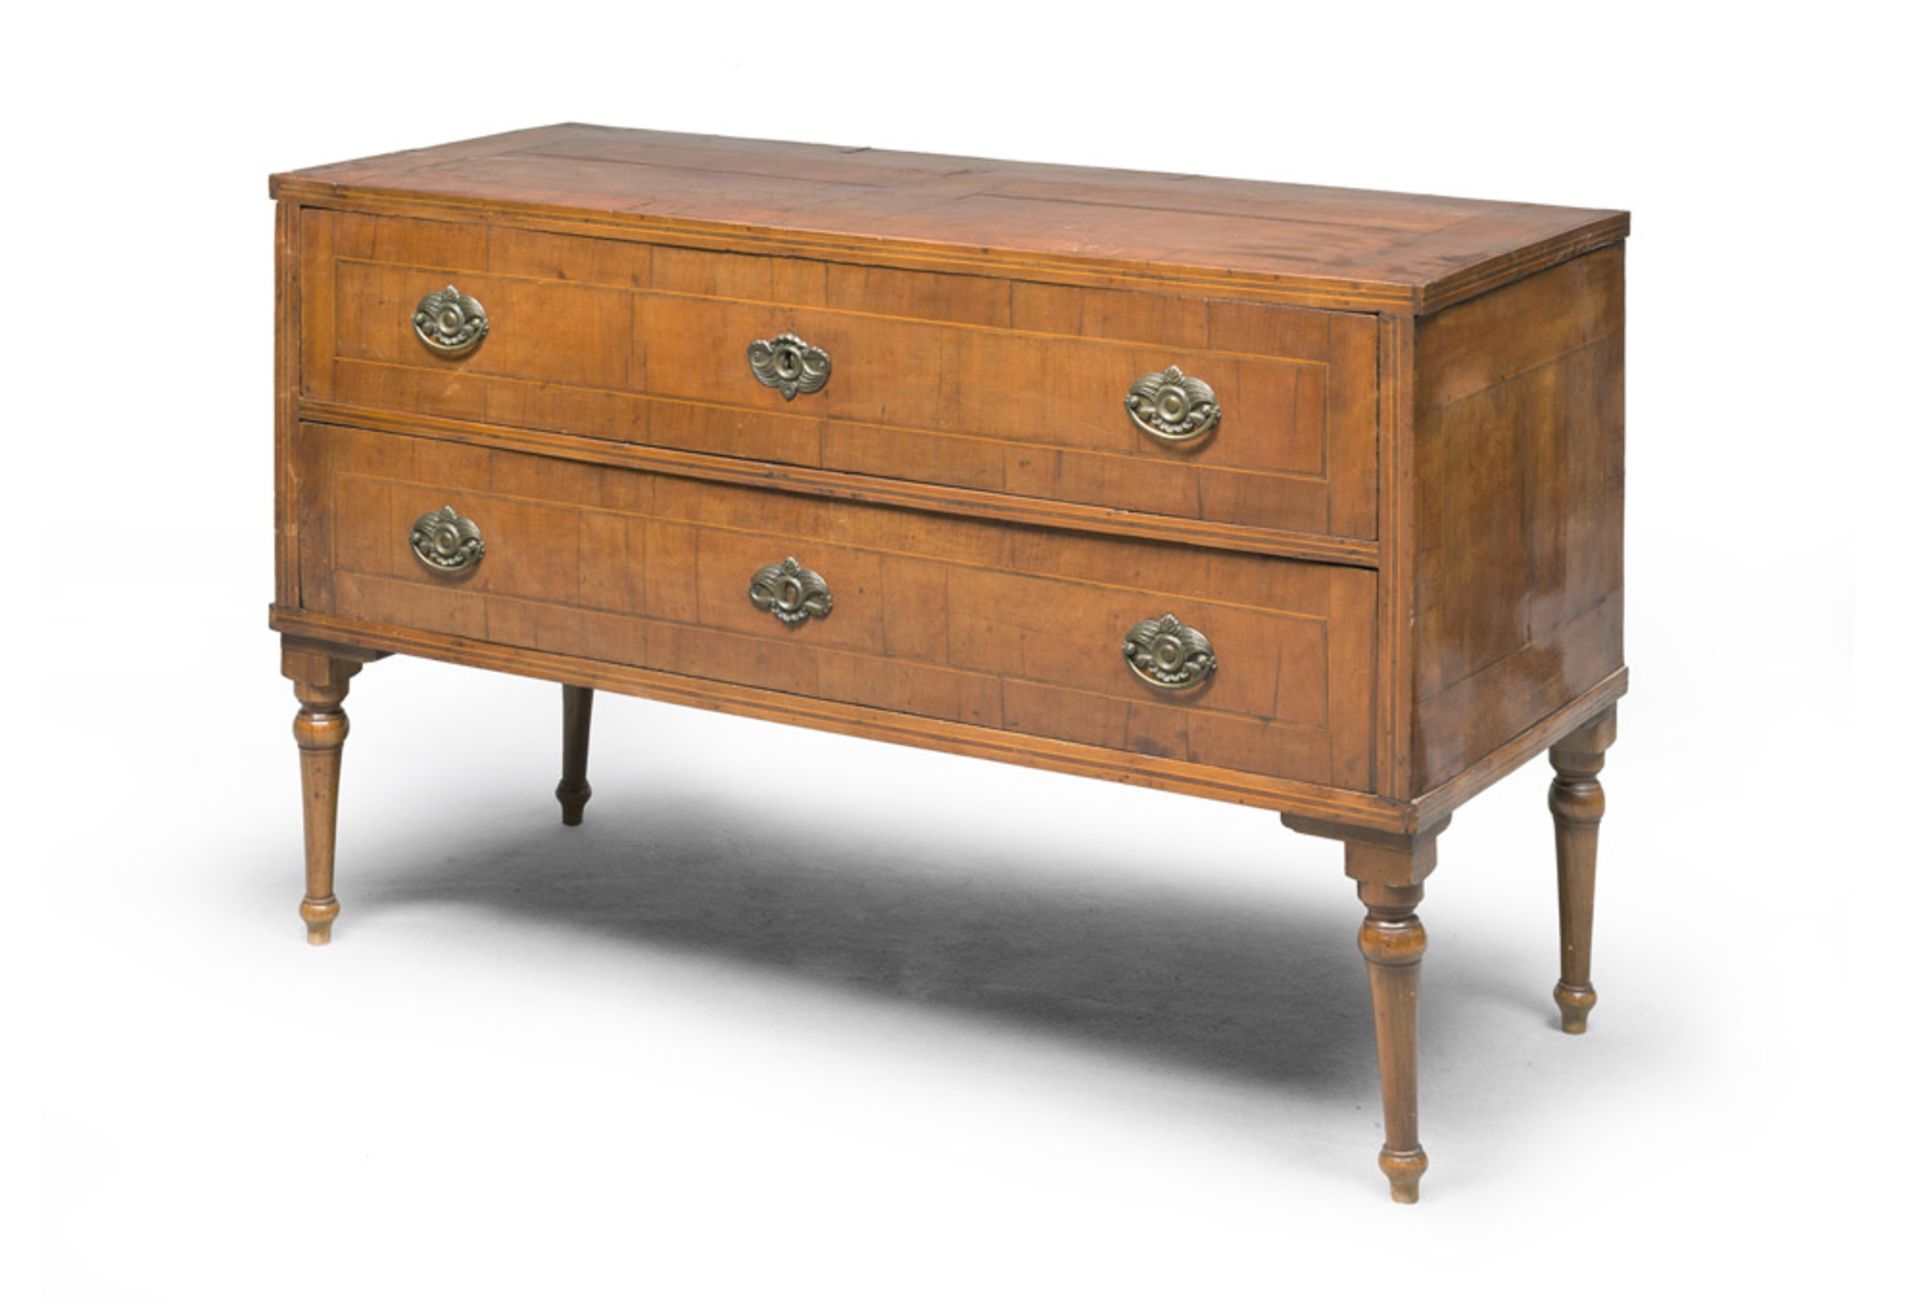 Cherrywood with rosewood and boxwood shingles Commode, North Italy late 18th century. Measures cm.